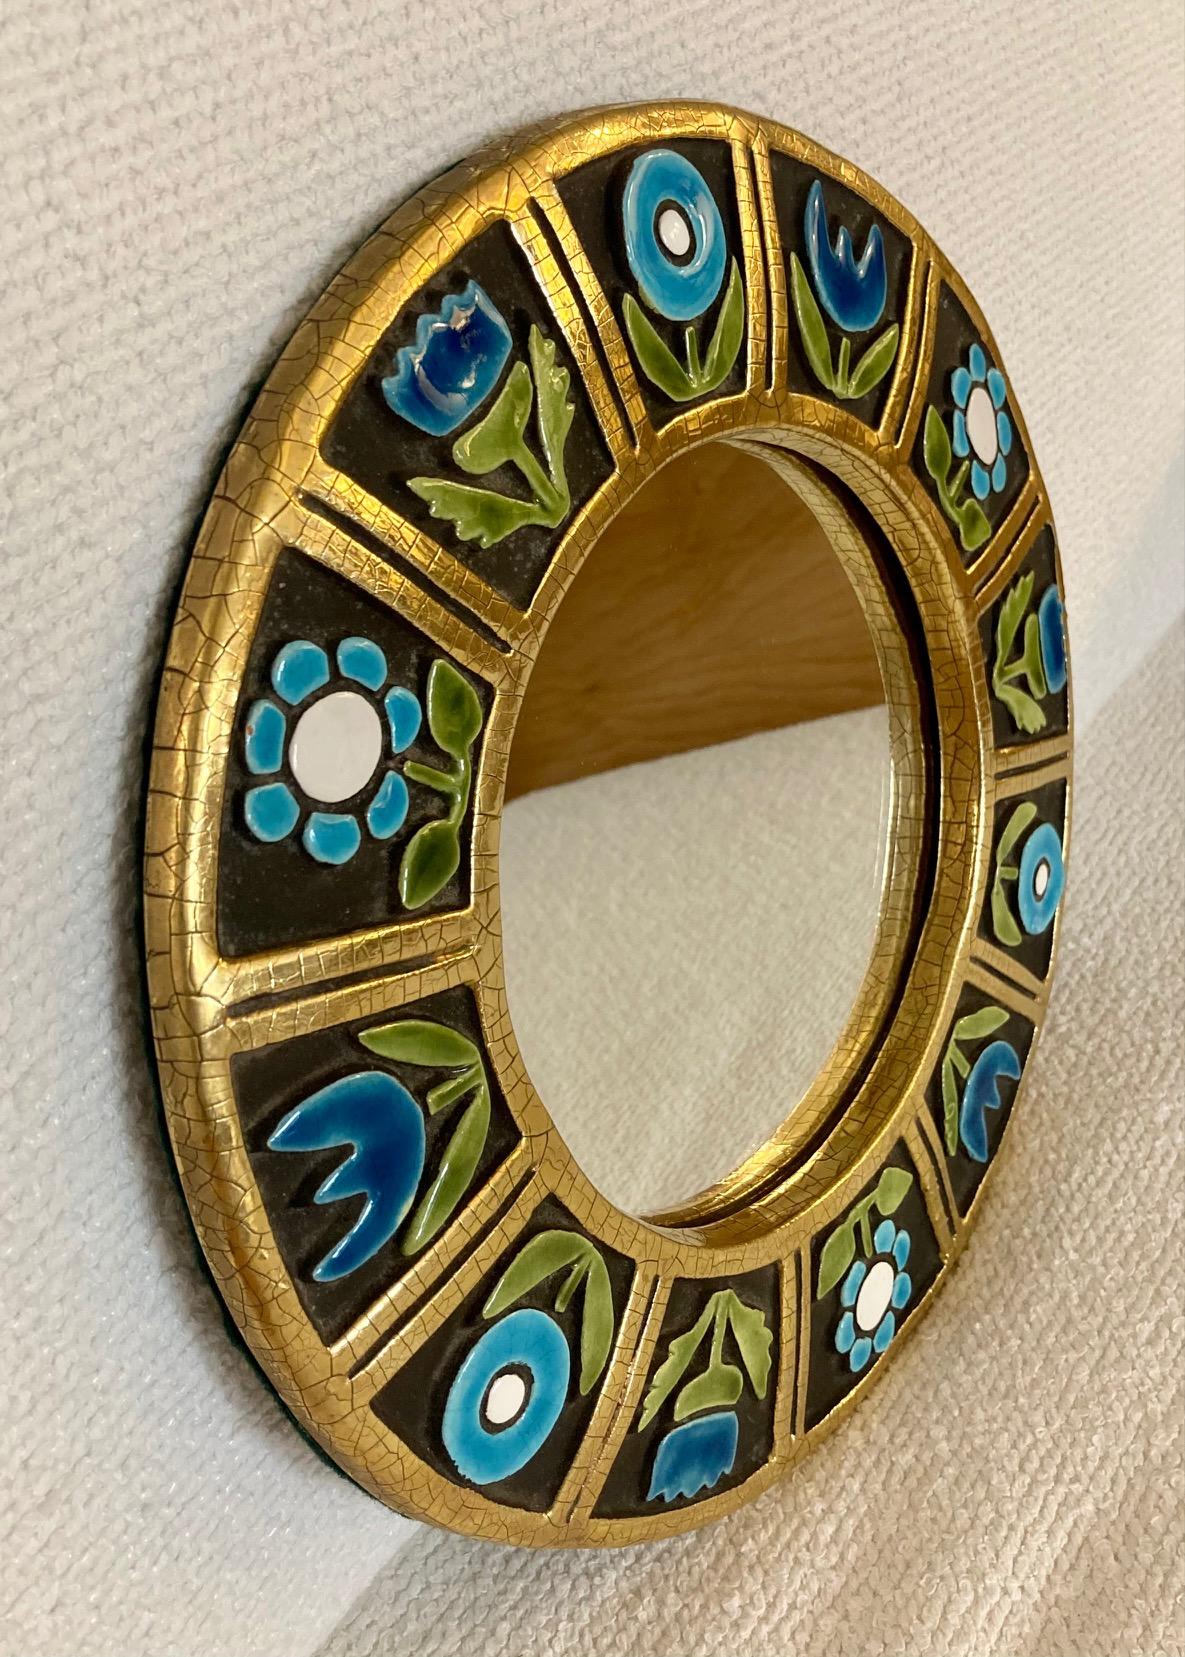 Round ceramic wall mirror.

The mirror is decorated with a frieze of blue flowers with gold enameled frame and edge.

Original green felt at the back, with ware in the corners 

Mithé Espelt (born 1923)

Lunel, south of France,

circa